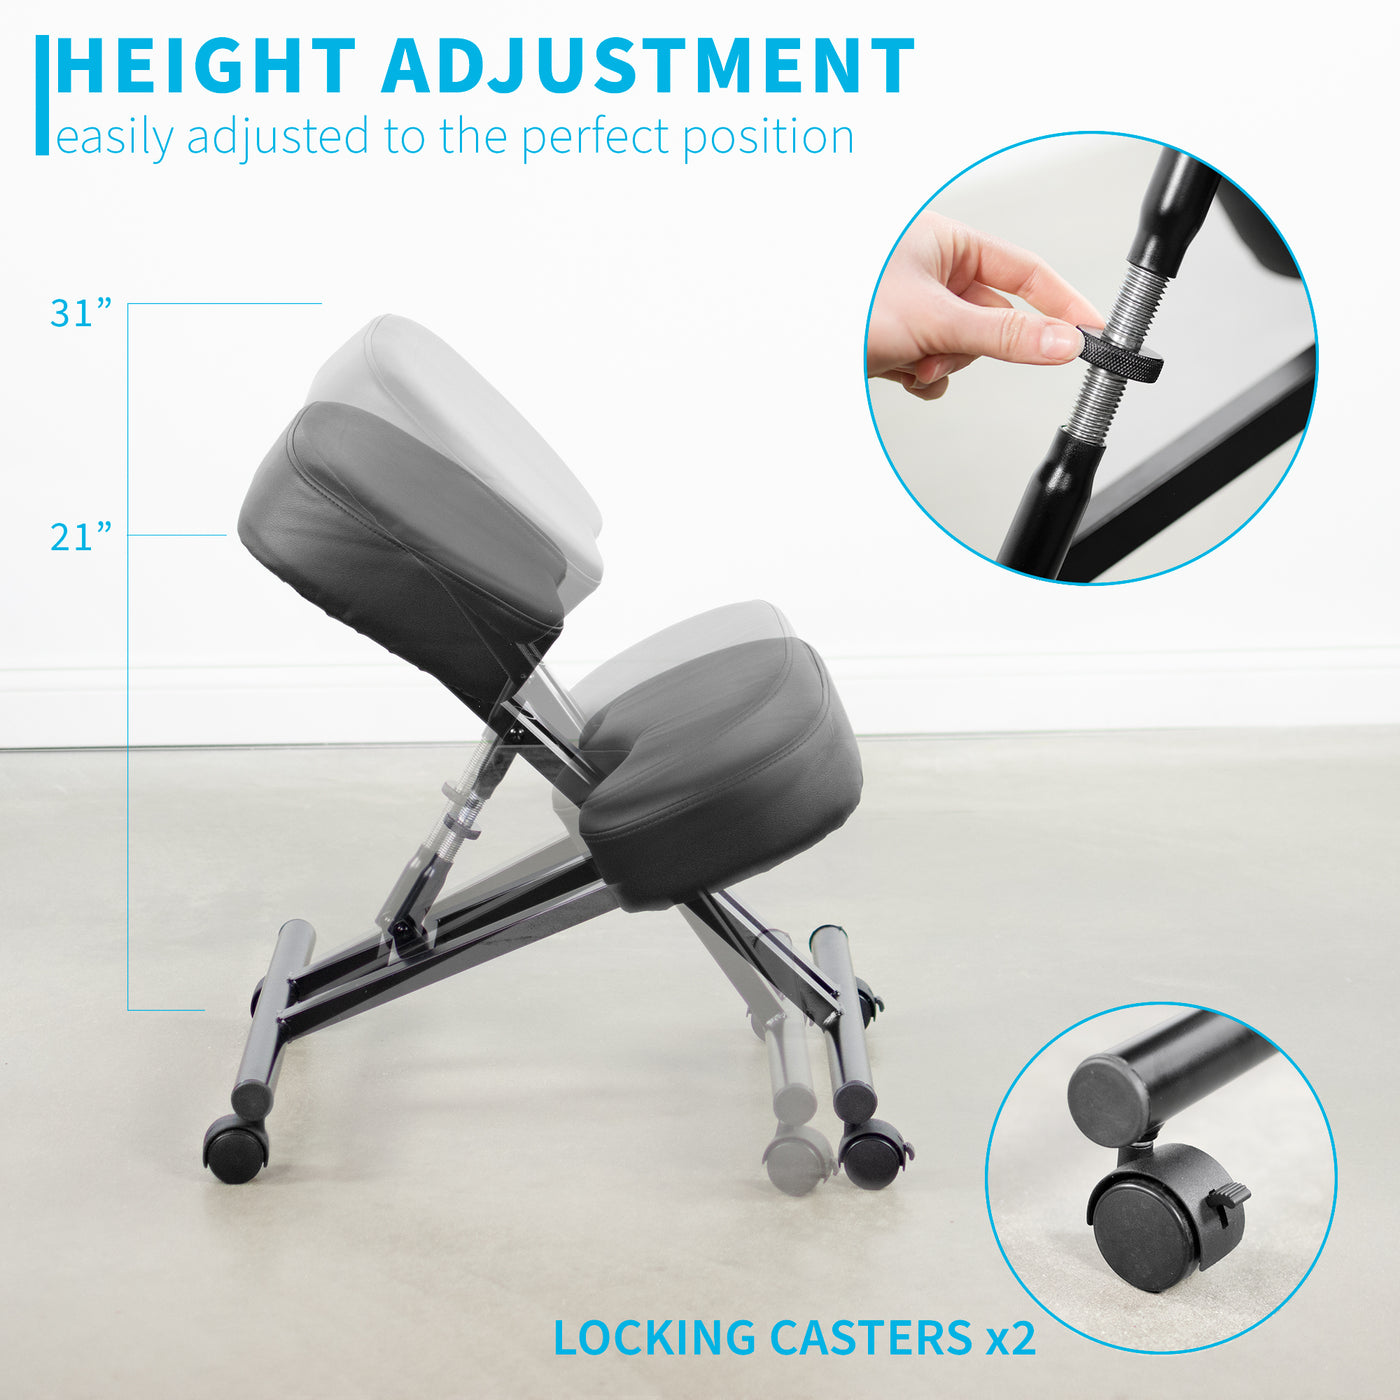 Height adjustment options are available to create the perfect positions featuring two locking caster wheels.